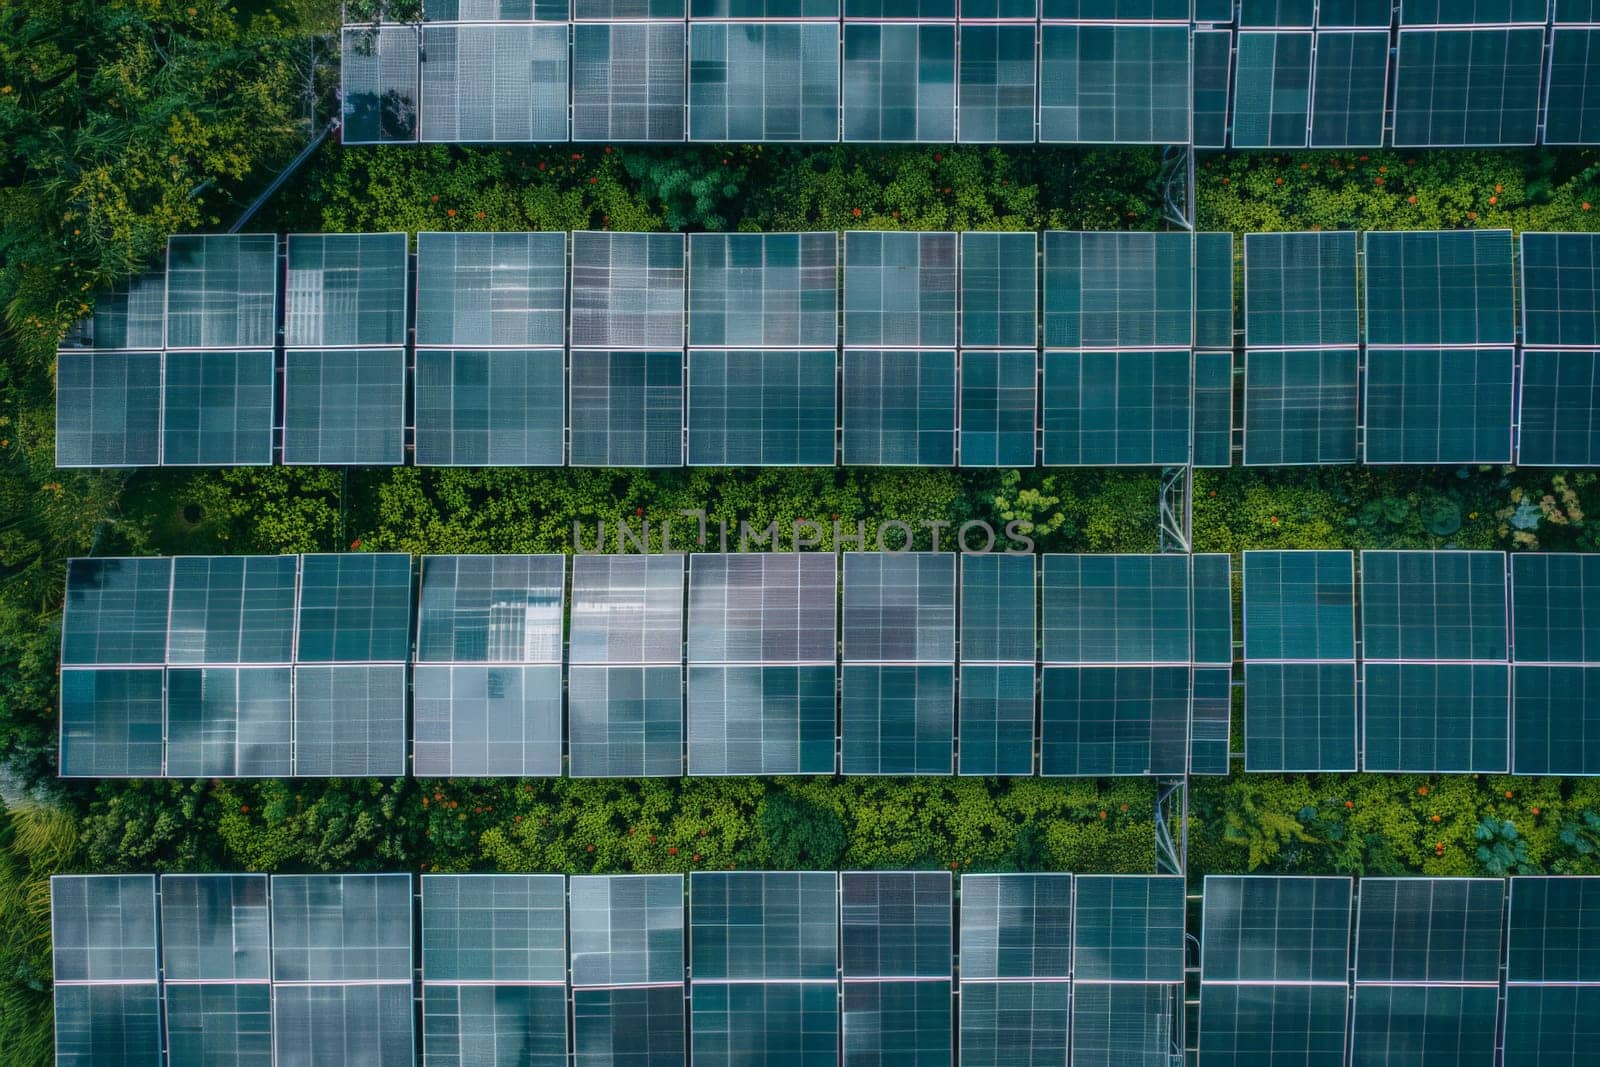 A series of solar panels are shown in a green forest. The panels are old and rusted, but they are still functional. Concept of sustainability and environmental responsibility